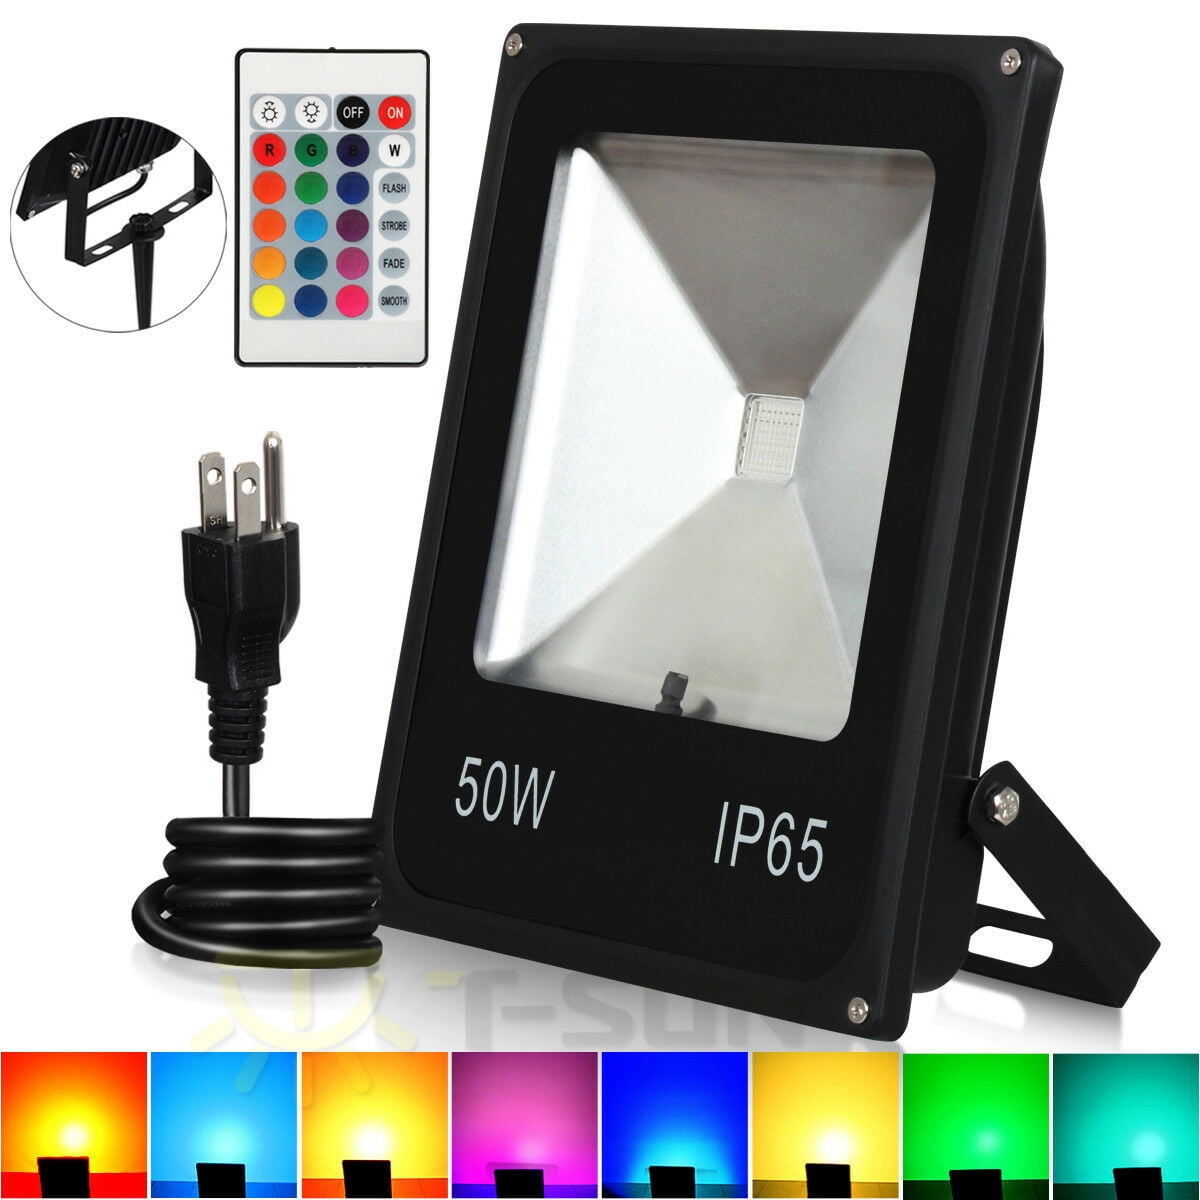 50W RGB Led Flood Lights Outdoor, RGB Color Changing Dimmable Floodlights  with Remote Control, Indoor Party Stage light Landscape Lighting, IP65  Waterproof Security RGB Flood Lamps